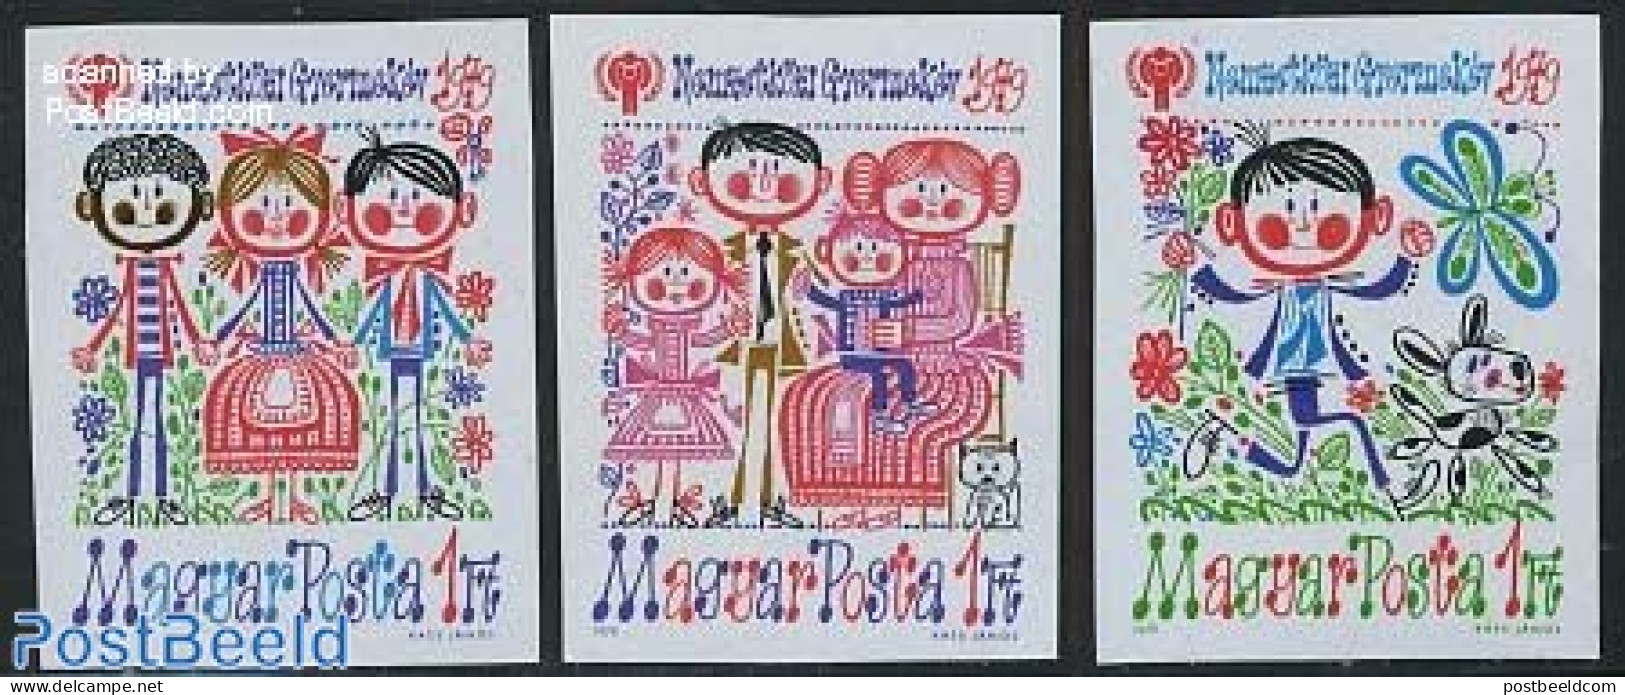 Hungary 1979 Int. Year Of The Child 3v Imperforated, Mint NH, Nature - Various - Butterflies - Cats - Dogs - Toys & Ch.. - Unused Stamps